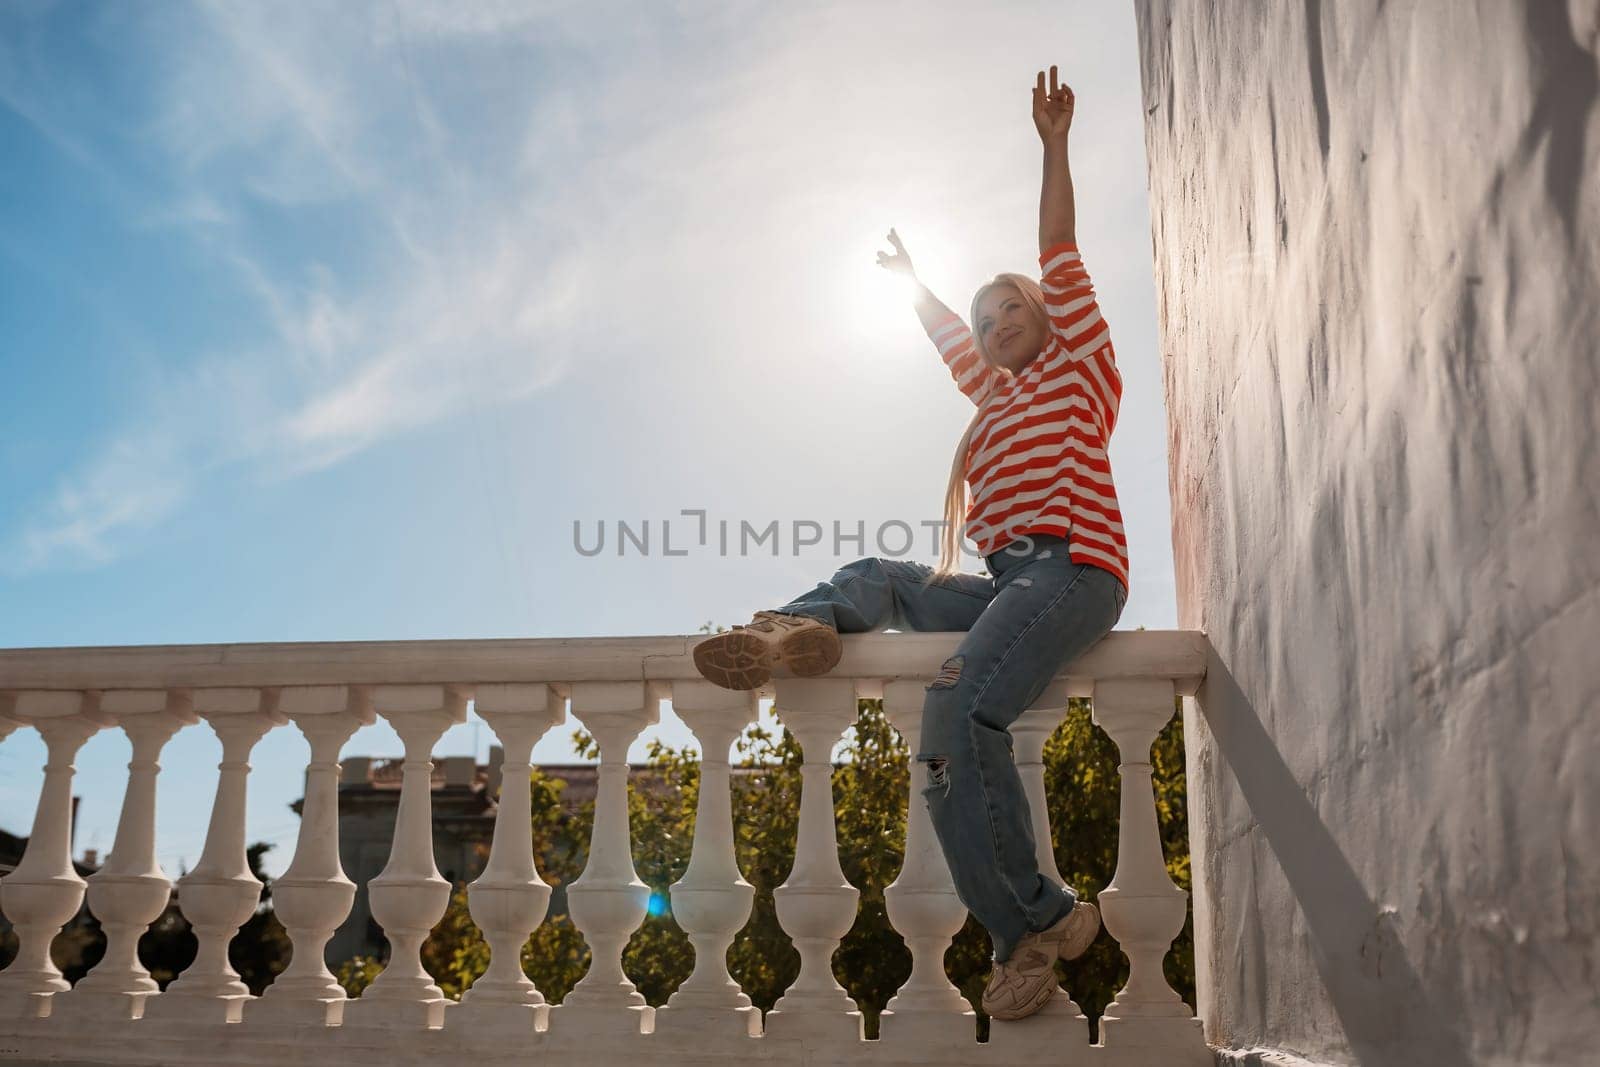 A woman is sitting on a railing with her arms raised in the air. The sun is shining brightly, creating a warm and inviting atmosphere. by Matiunina